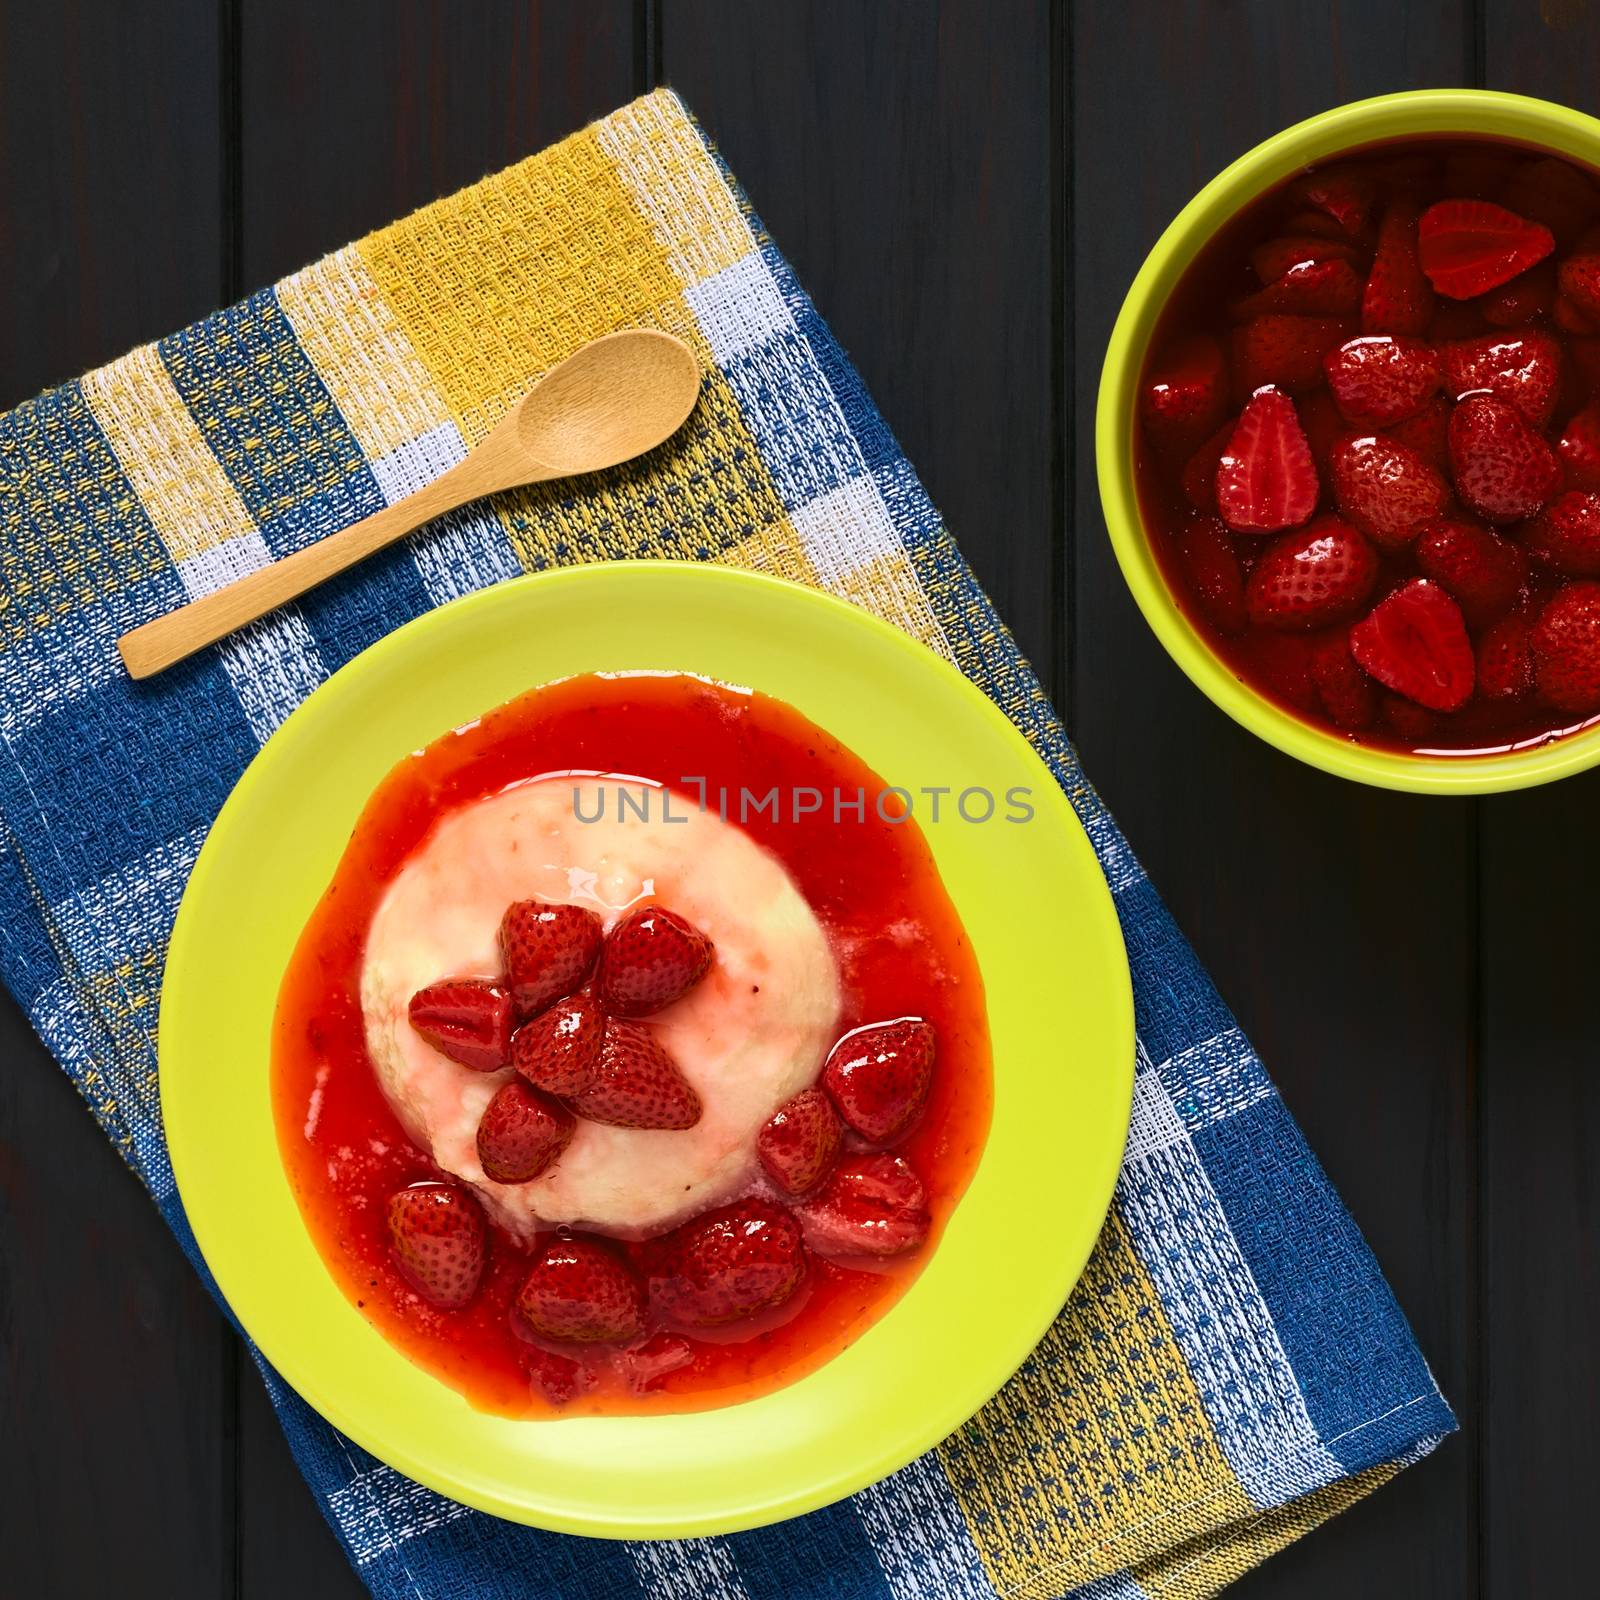 Overhead shot of semolina pudding with strawberry compote served on plate, photographed on kitchen towel on dark wood with natural light